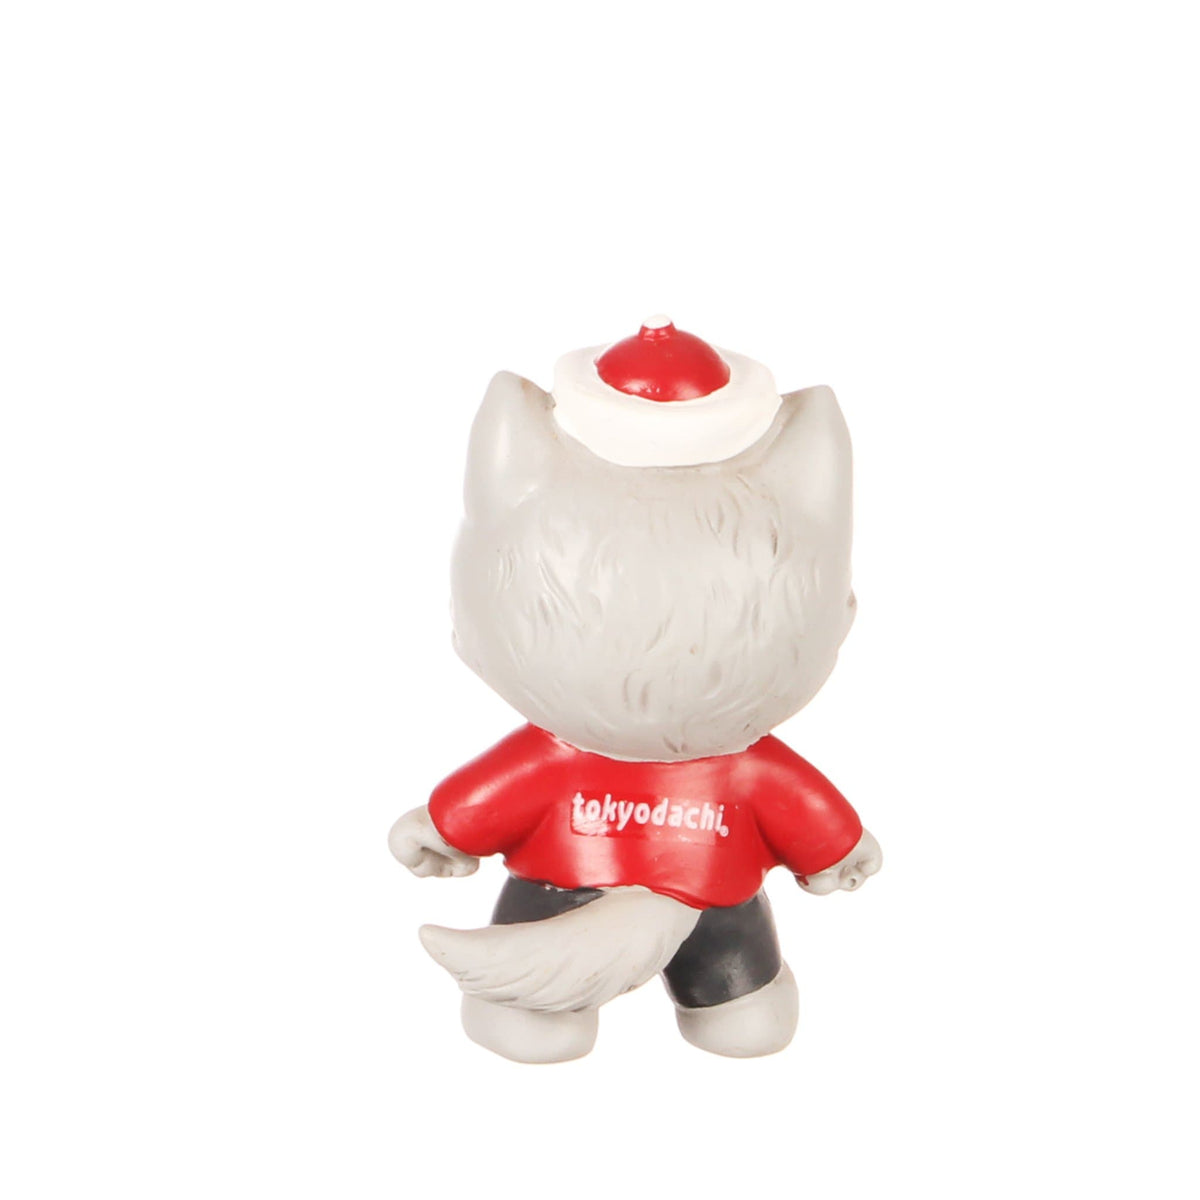 Zephyr Collectible North Carolina State Wolfpack Collectible Tokyodachi